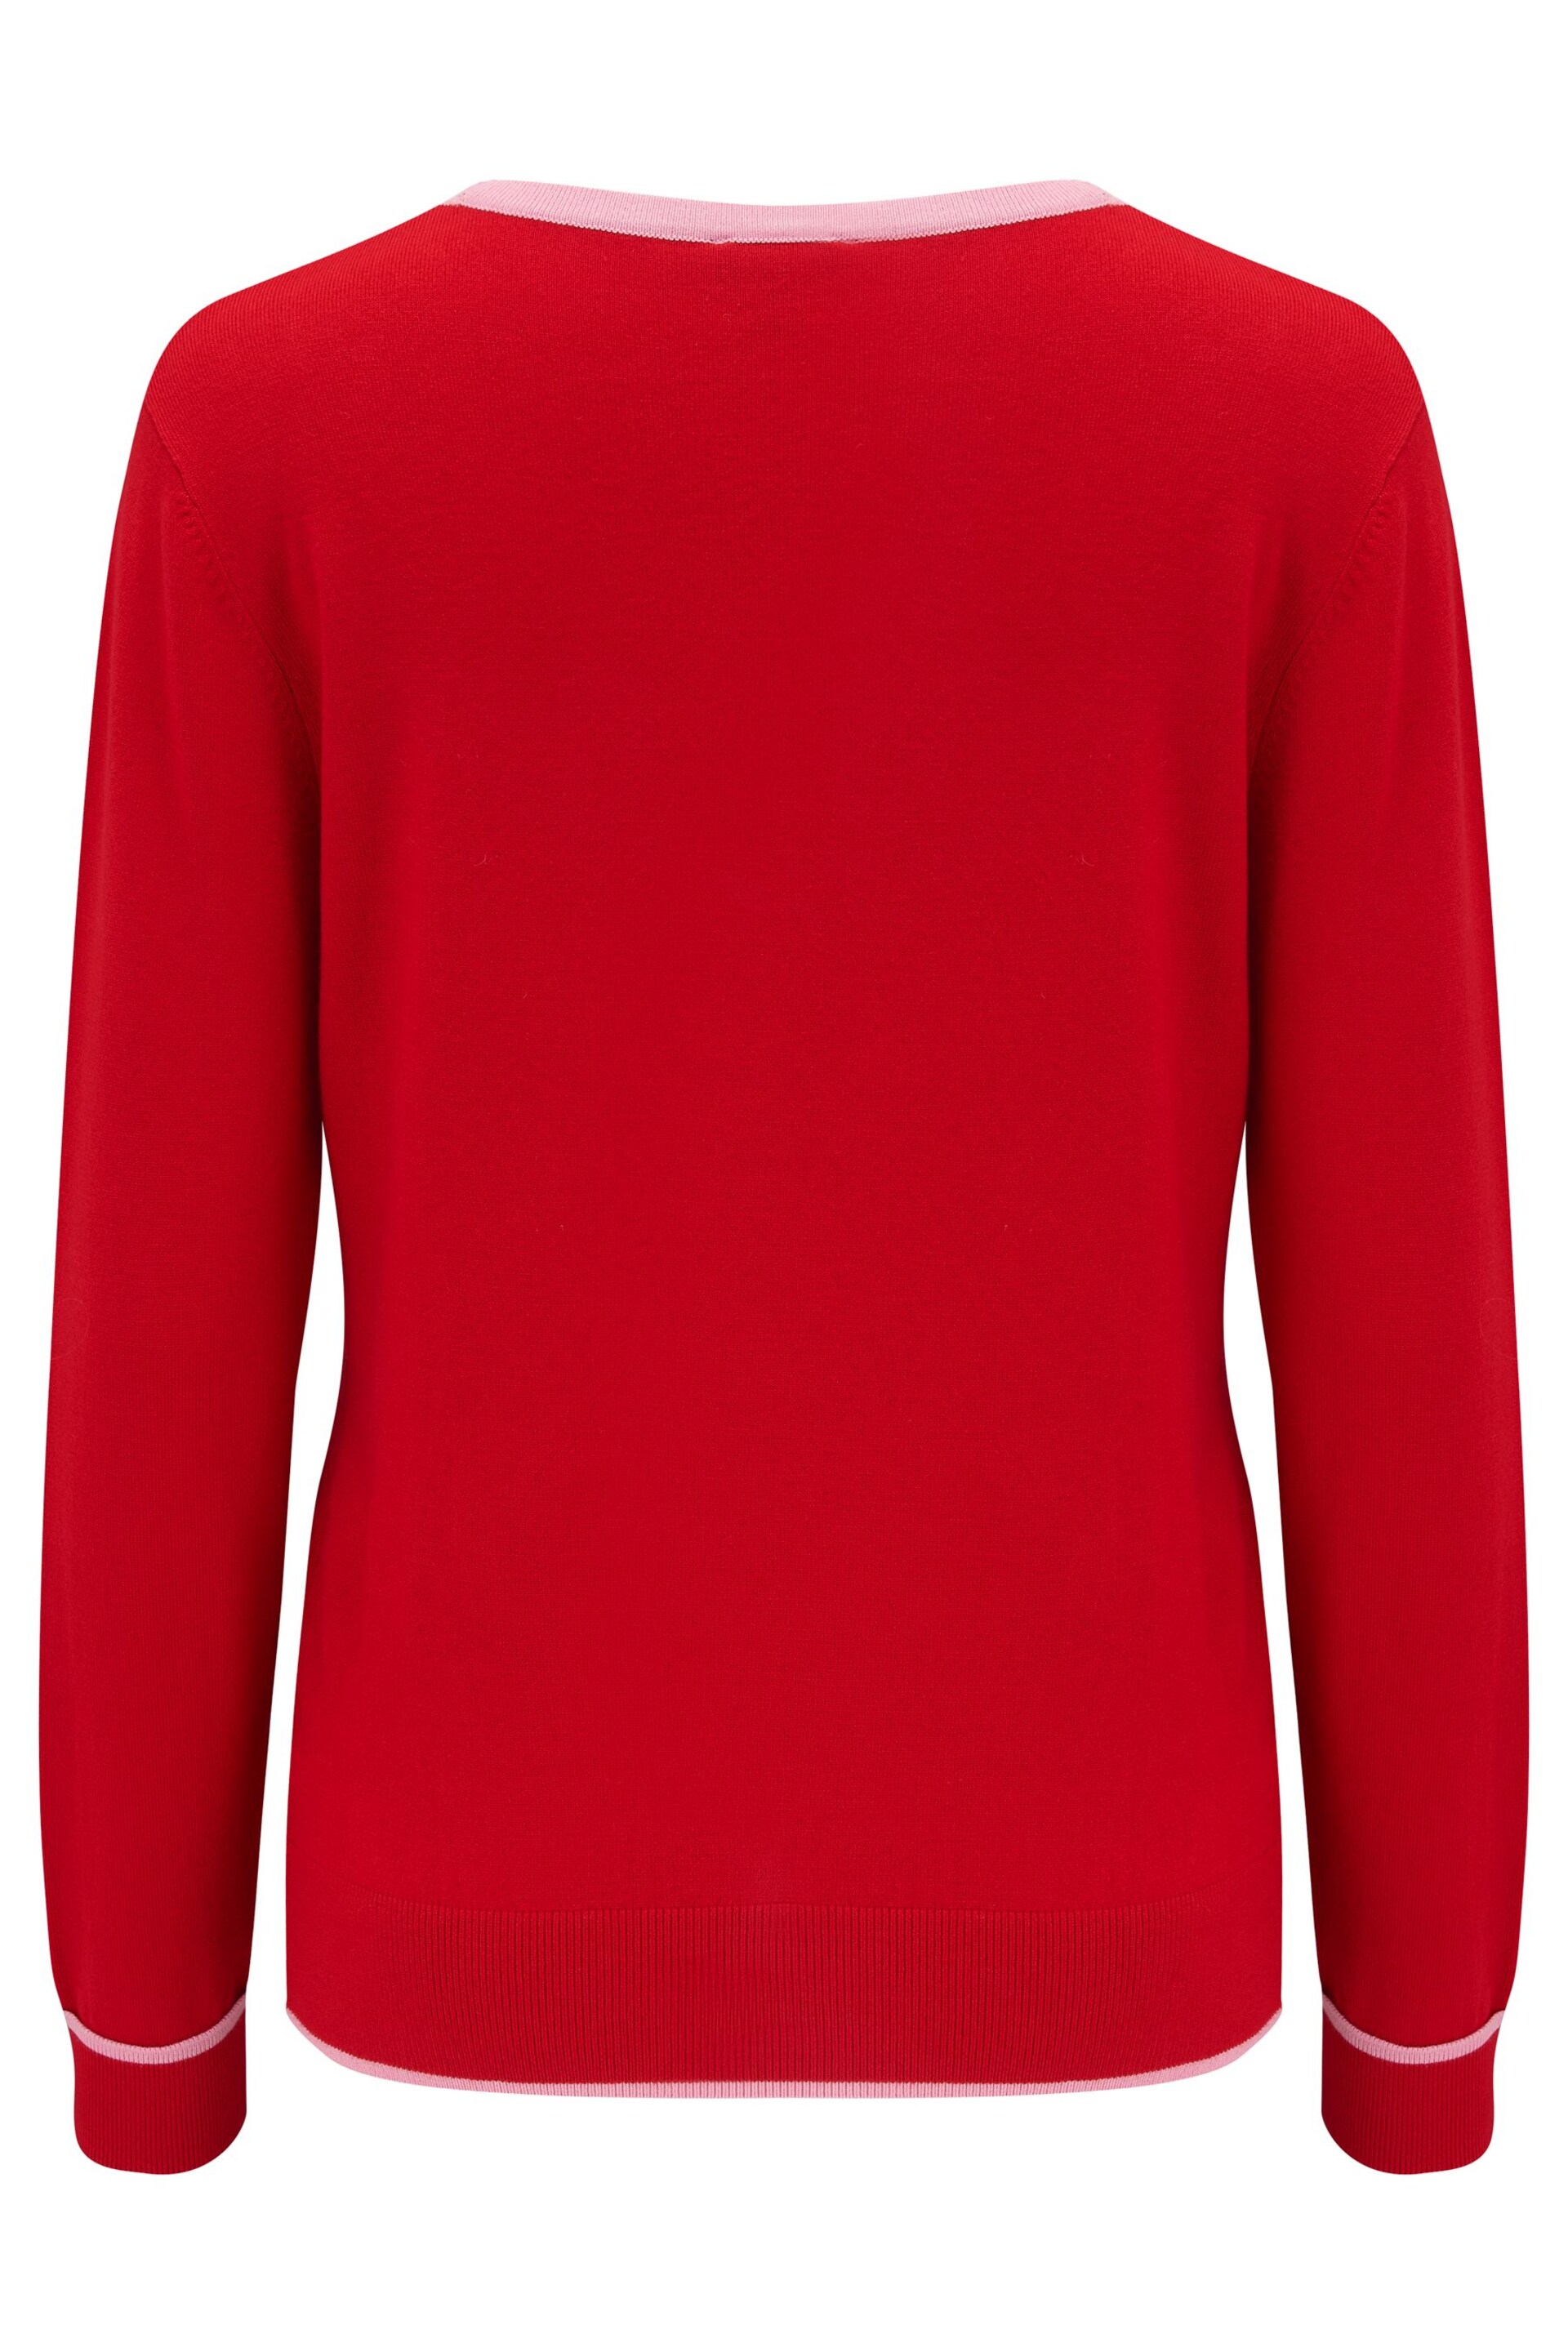 Pour Moi Red Rosie Colourblock Jumper - Image 5 of 5